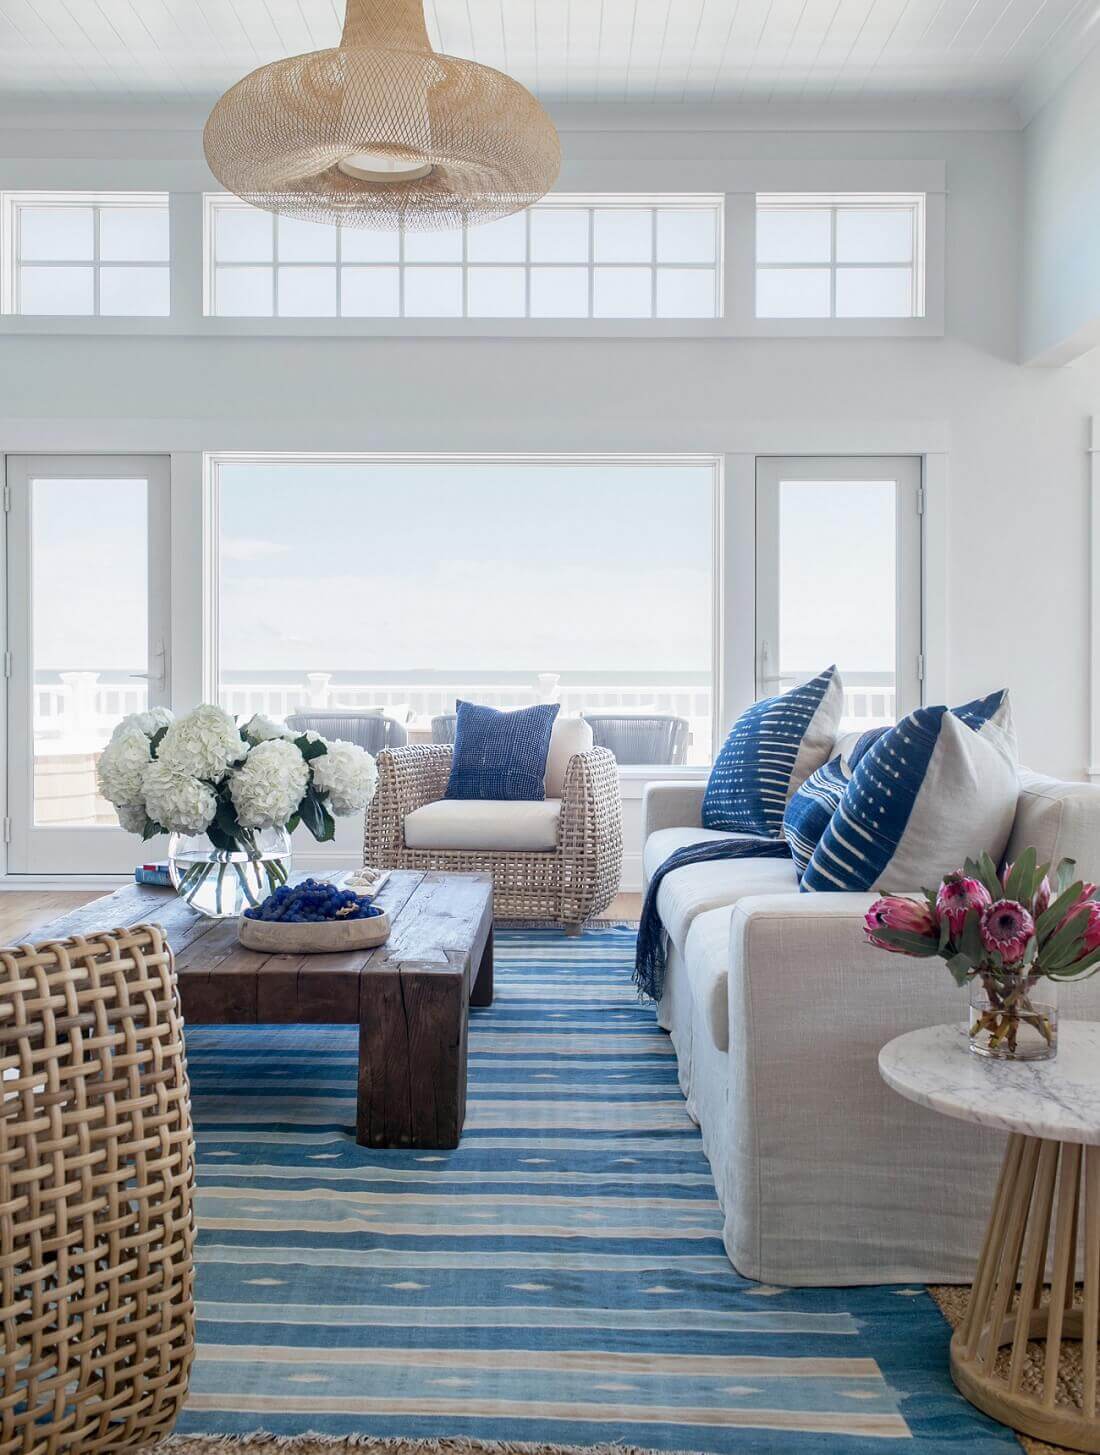 Furniture For A Coastal themed Room